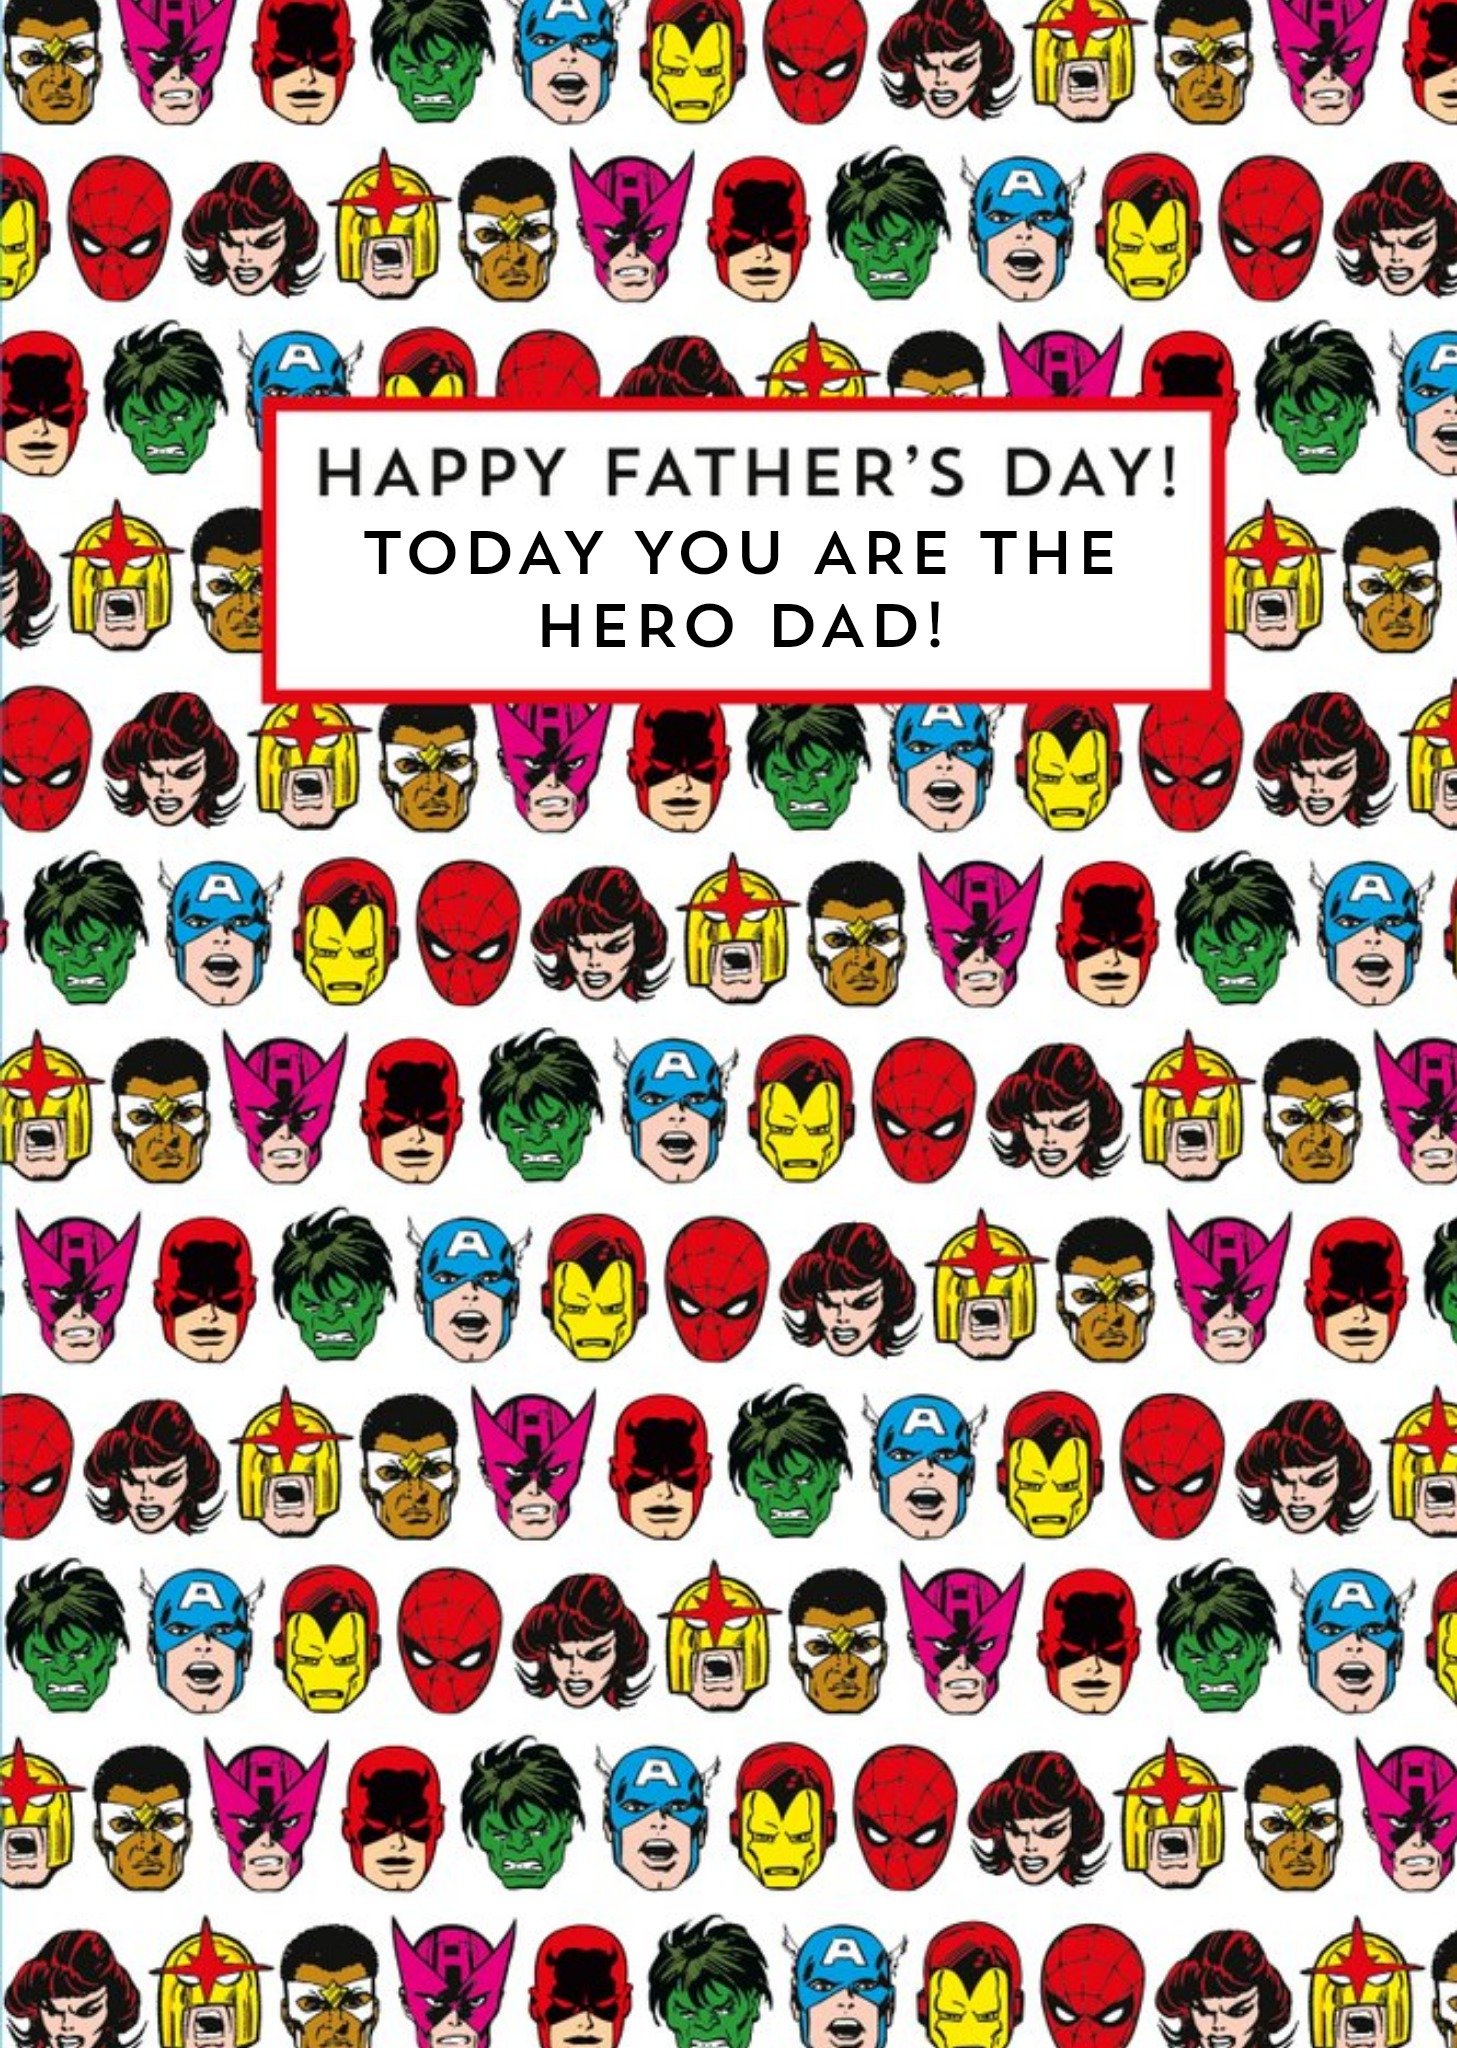 Disney Marvel Characters You Are The Hero Dad Father's Day Card, Large